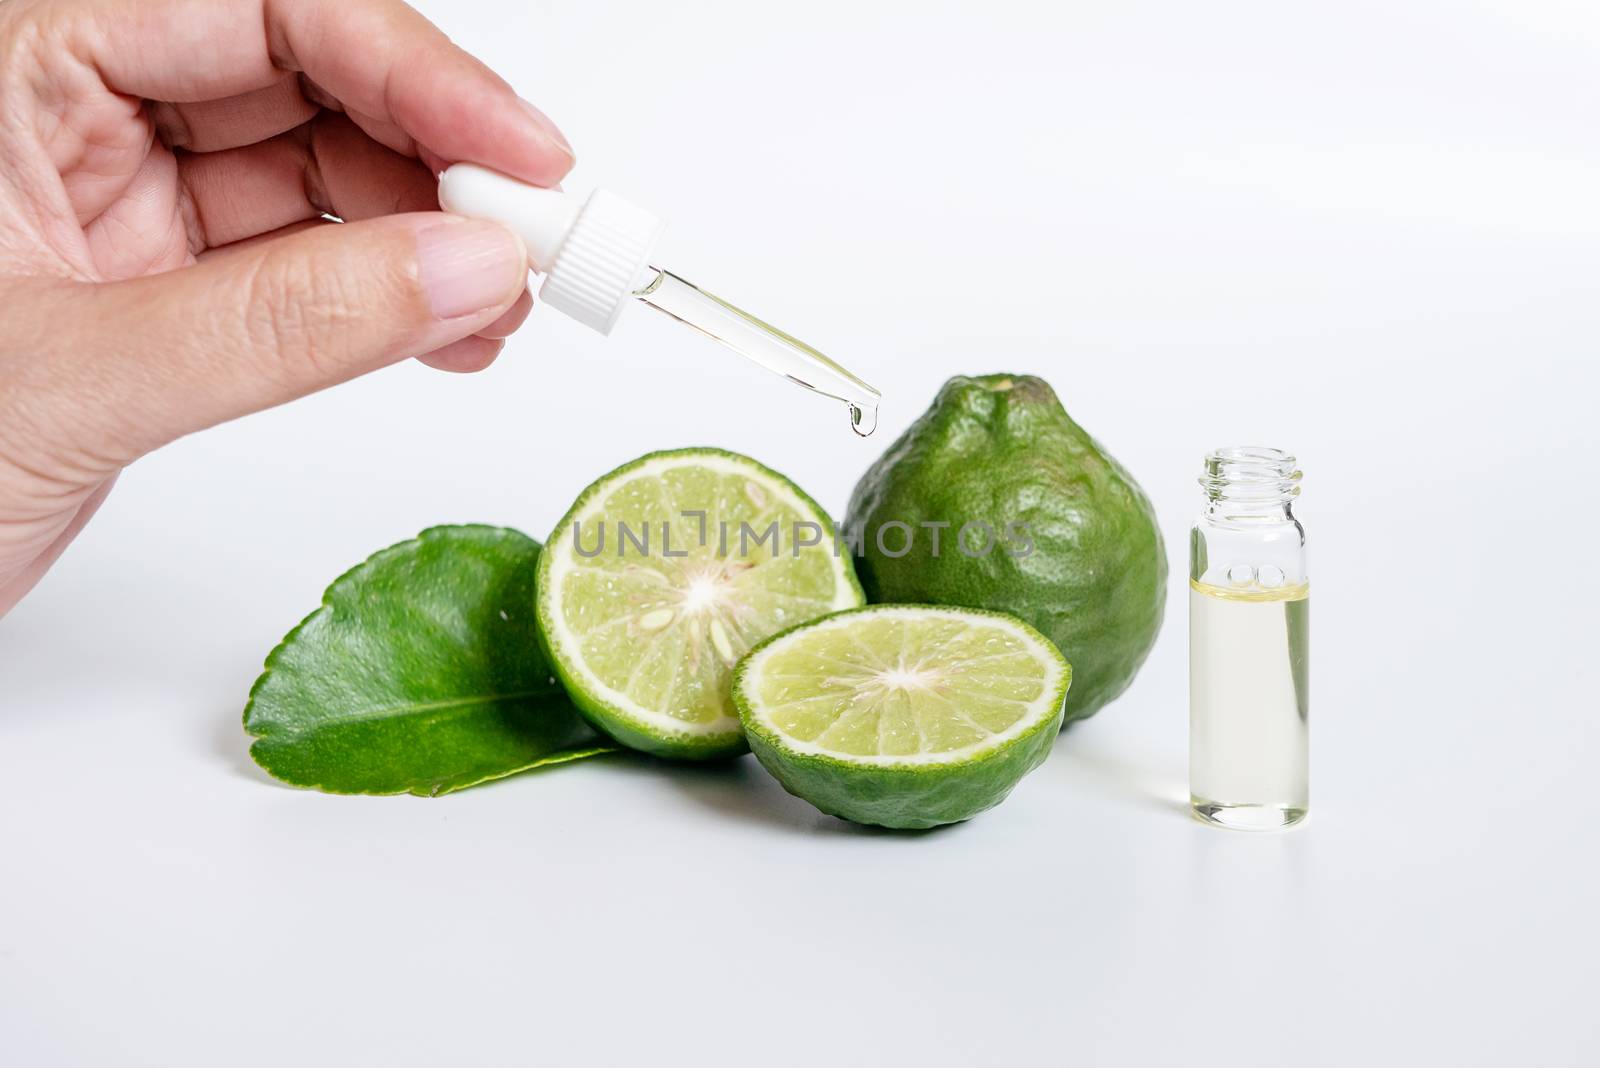 bergamot serum, organic products made from natural concept. woman hand holding glass dropper for dermatologist testing decorate with slide kaffir limes ,kaffir leaf on white background.